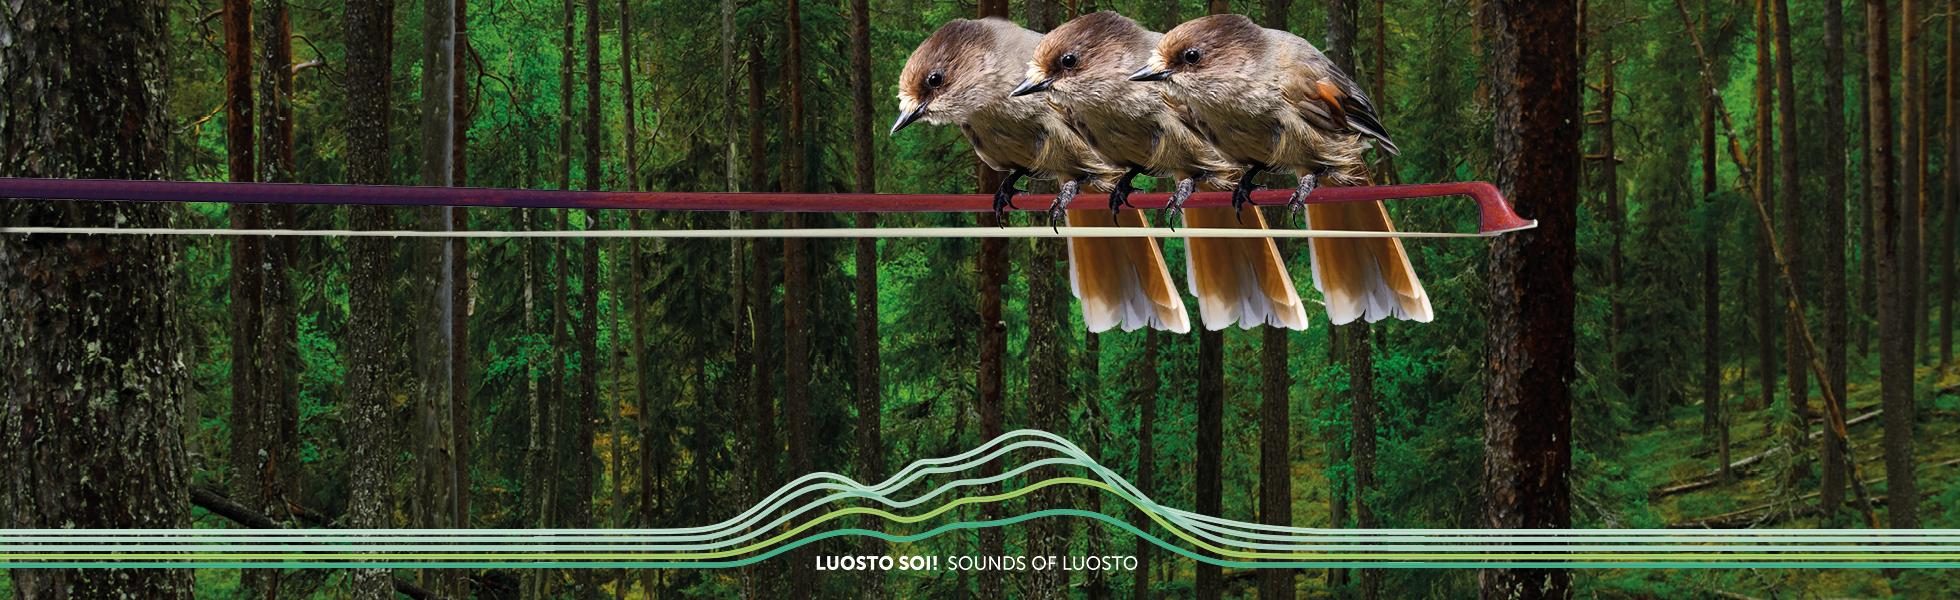 Sounds of Luosto 2021 – Unforgettable moments and music in the Spirit of Luosto